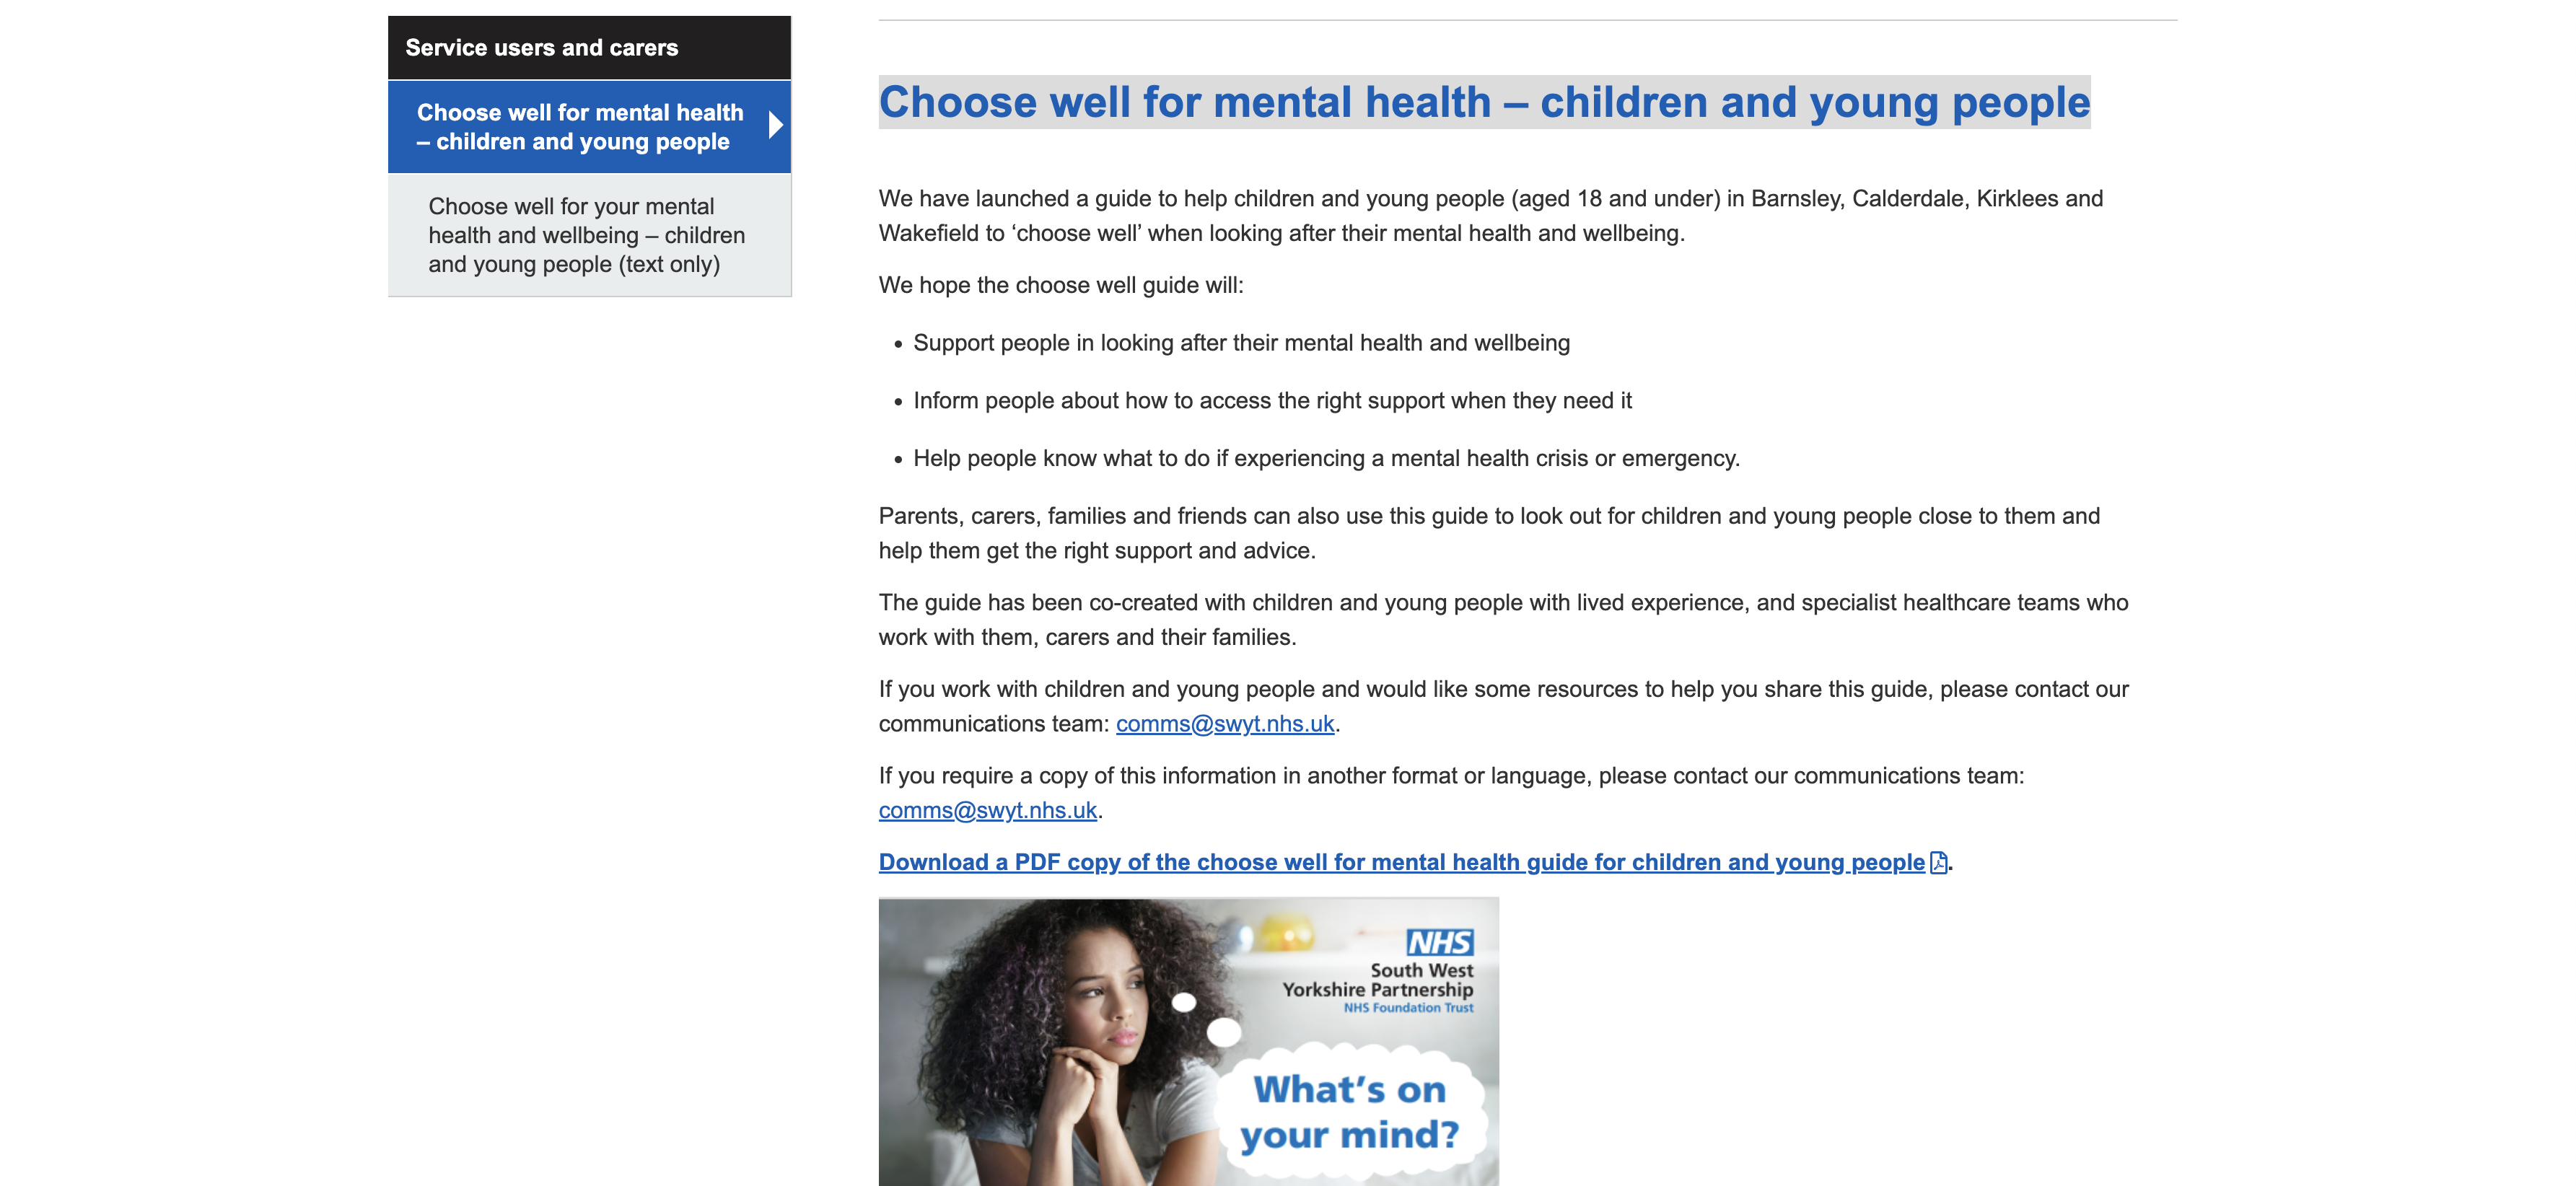 Choose well for mental health – children and young people guide